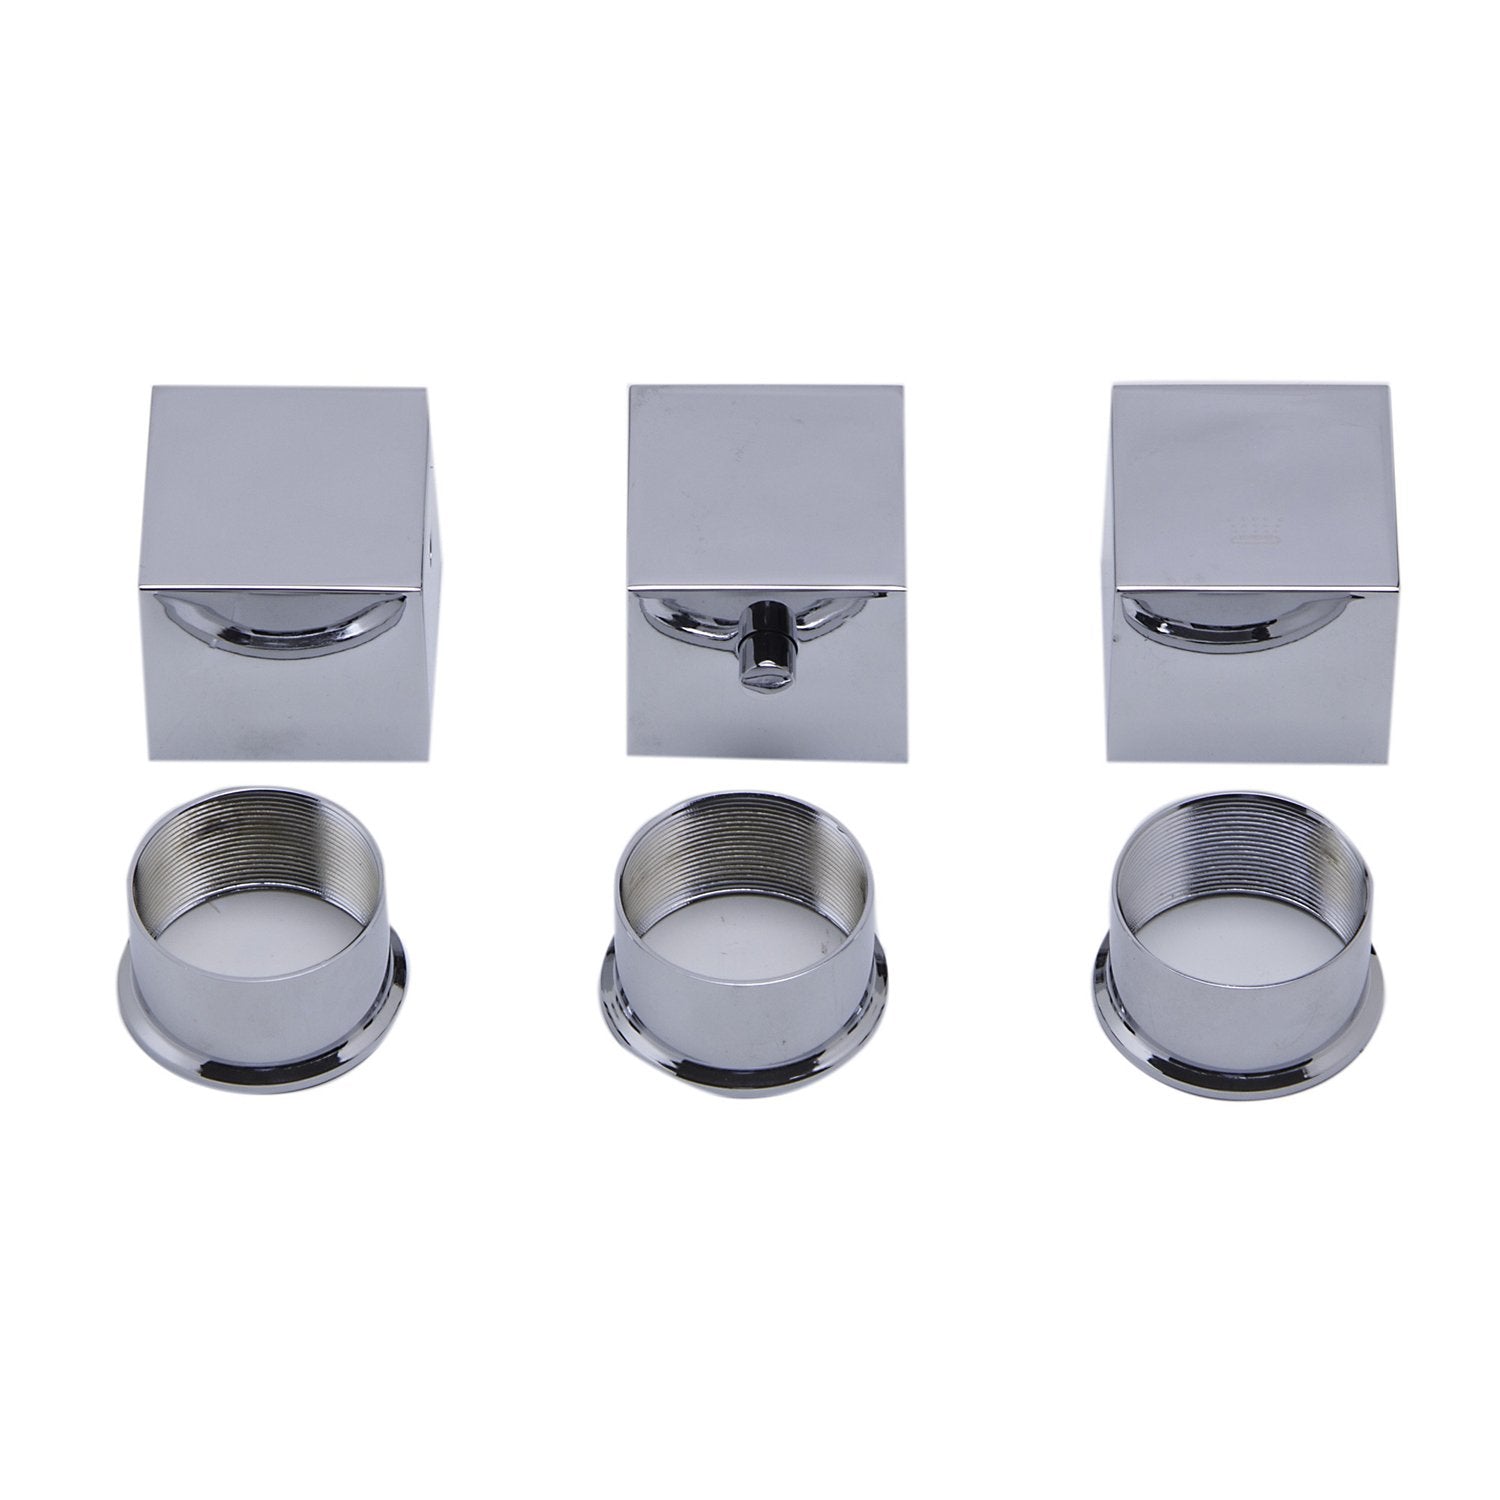 ALFI AB2801 Concealed 3-Way Thermostatic Valve Shower Mixer Square Knobs